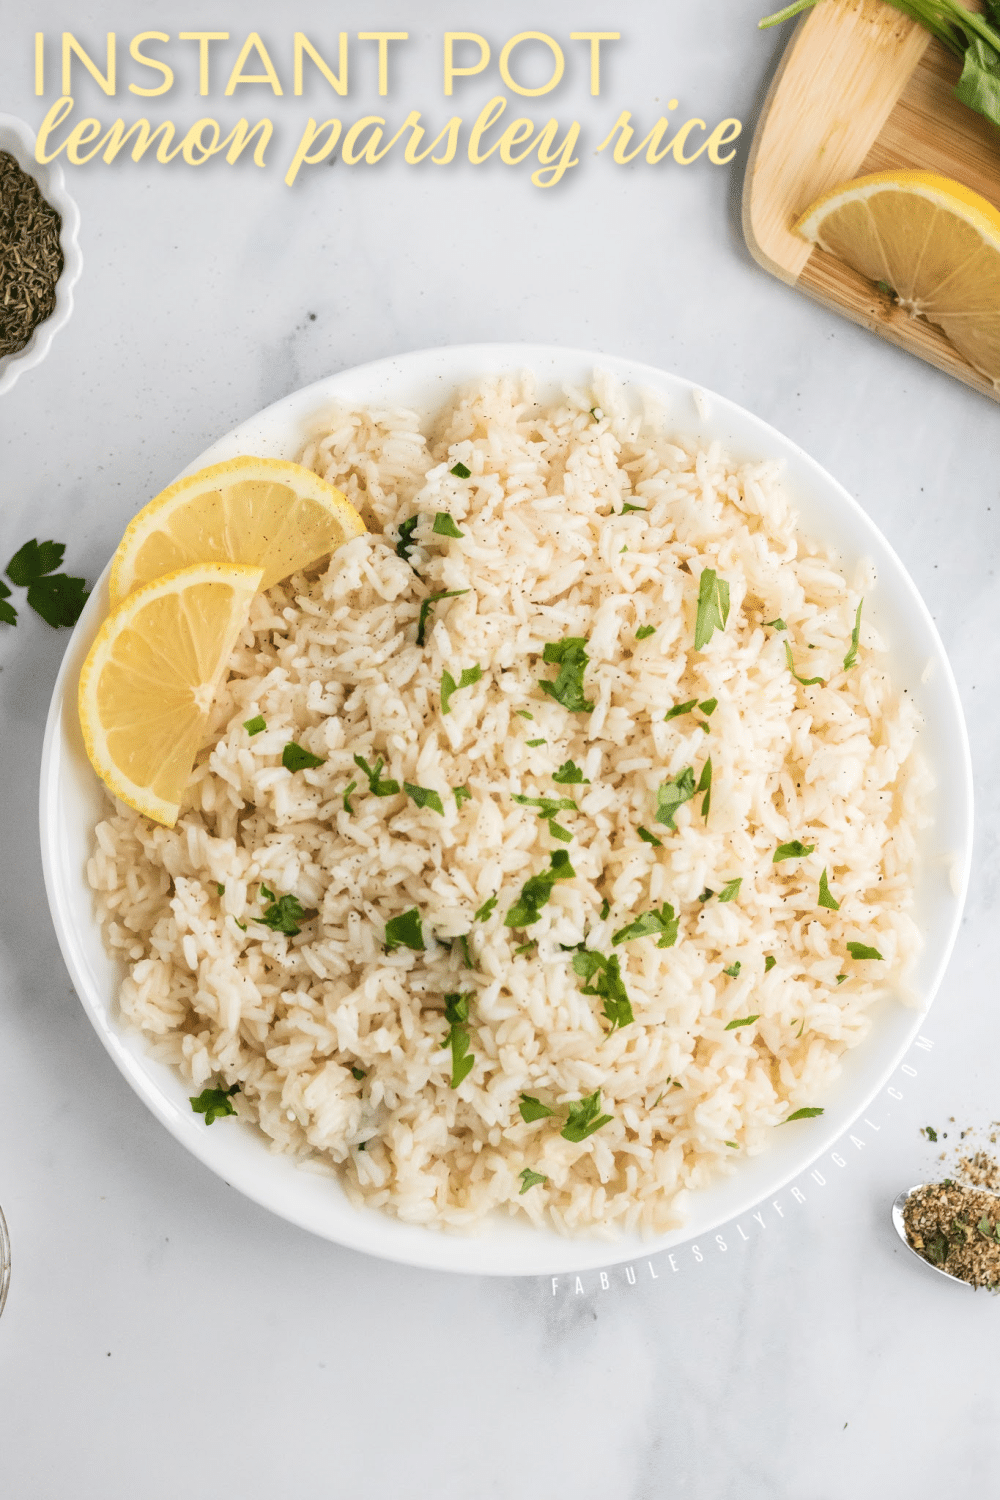 Parsley rice served with fresh lemon slices 